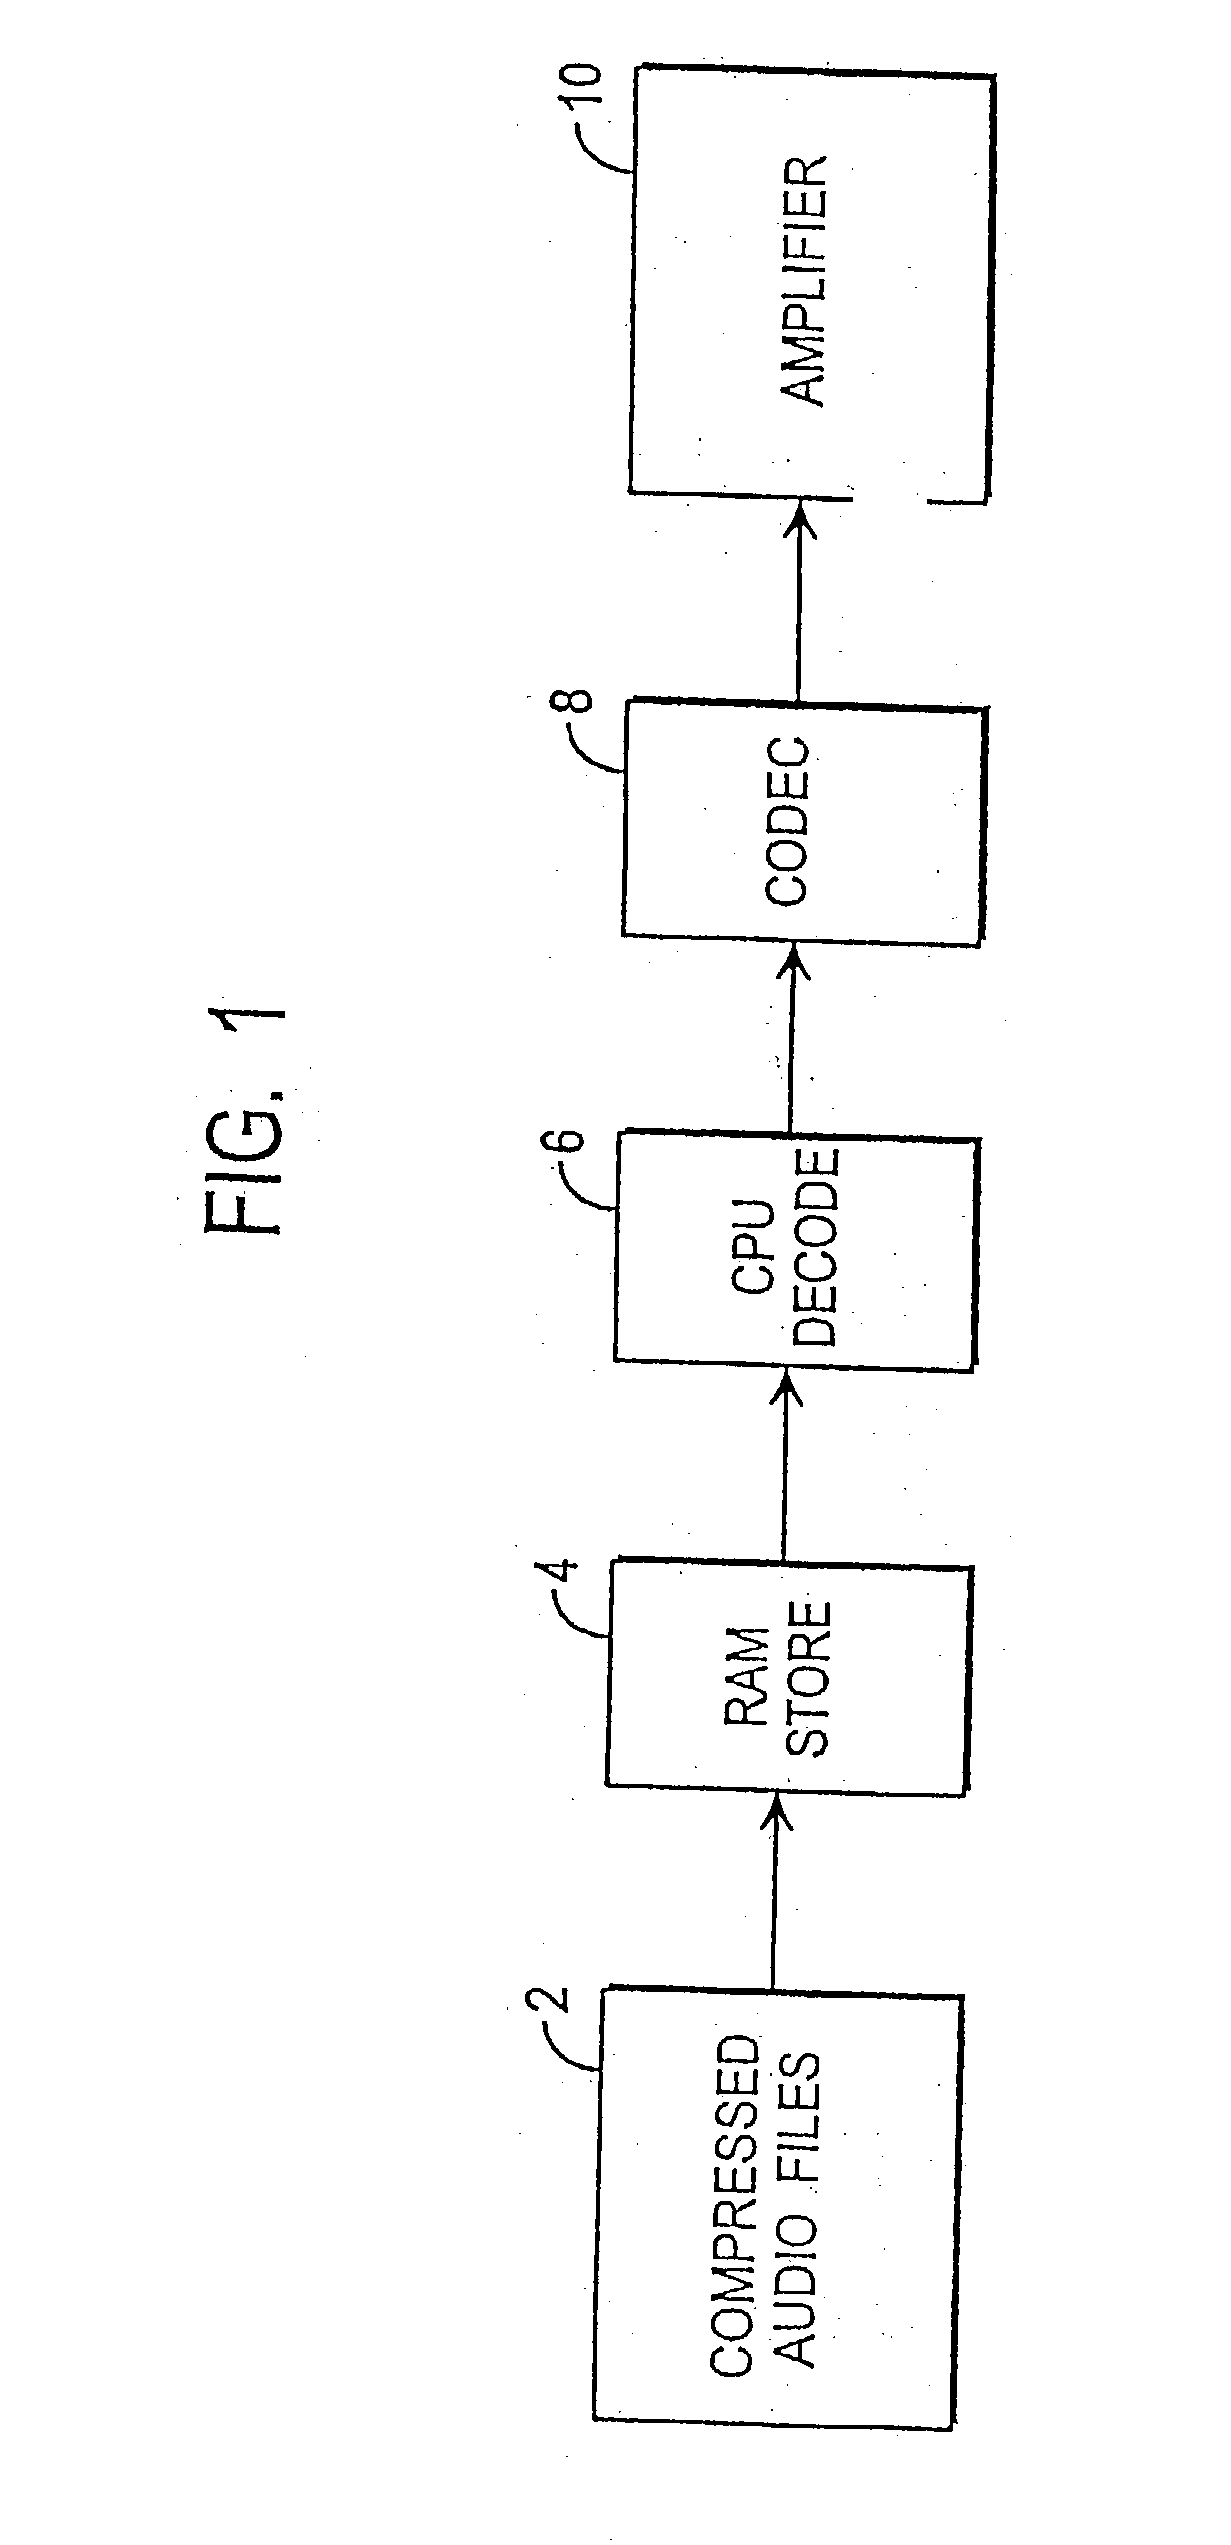 Low power digital audio decoding/playing system for computing devices